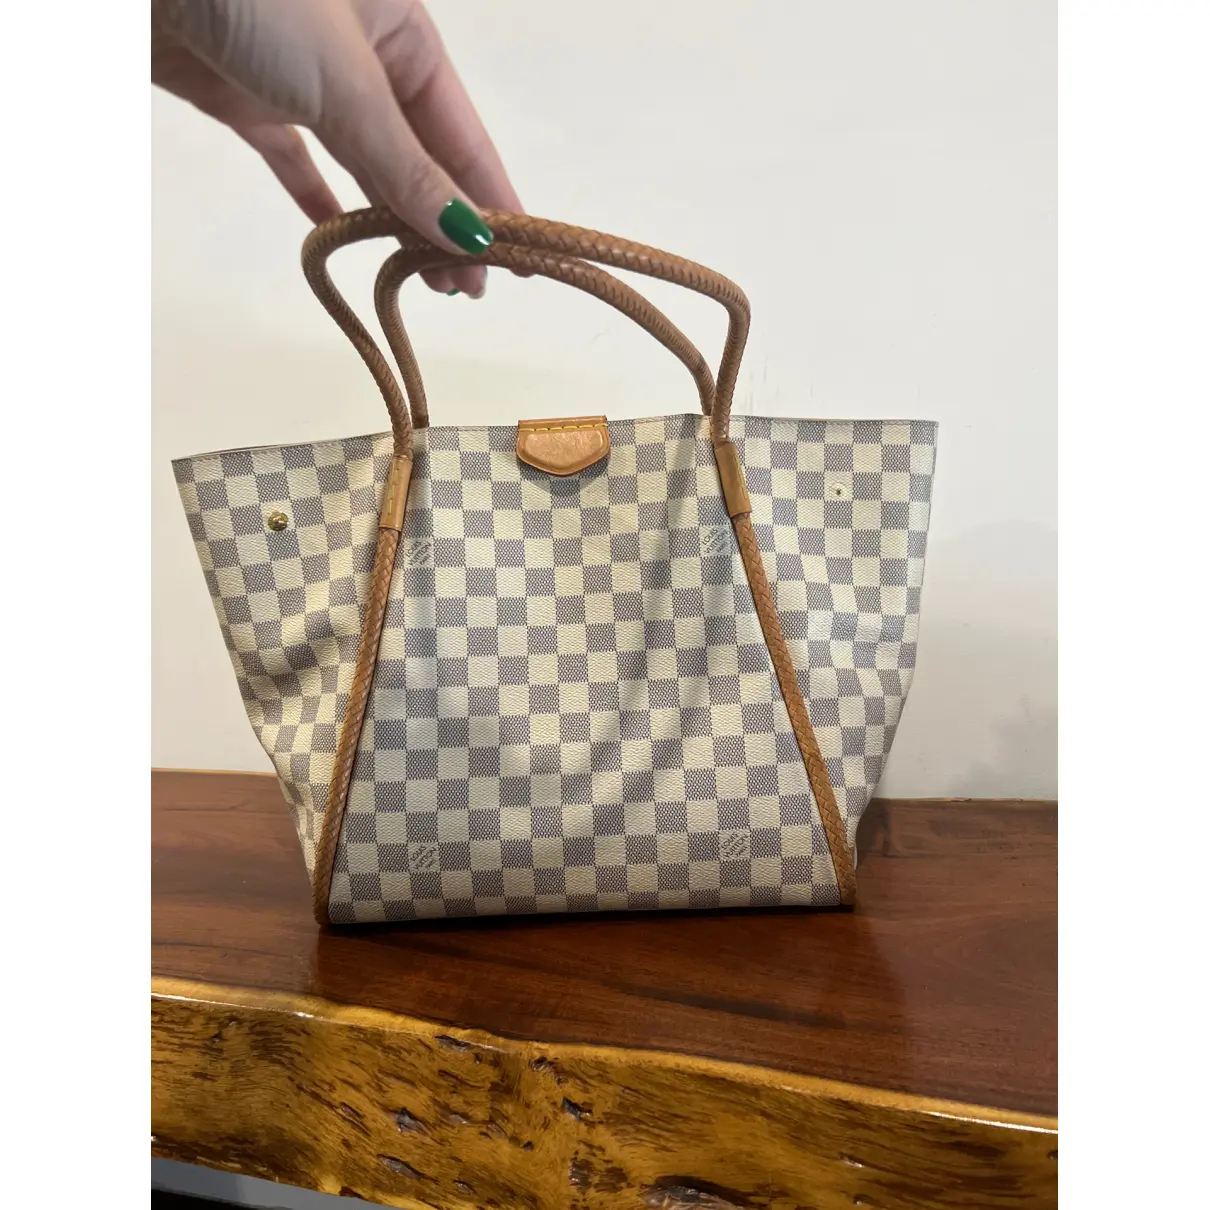 Buy Louis Vuitton Propriano leather tote online